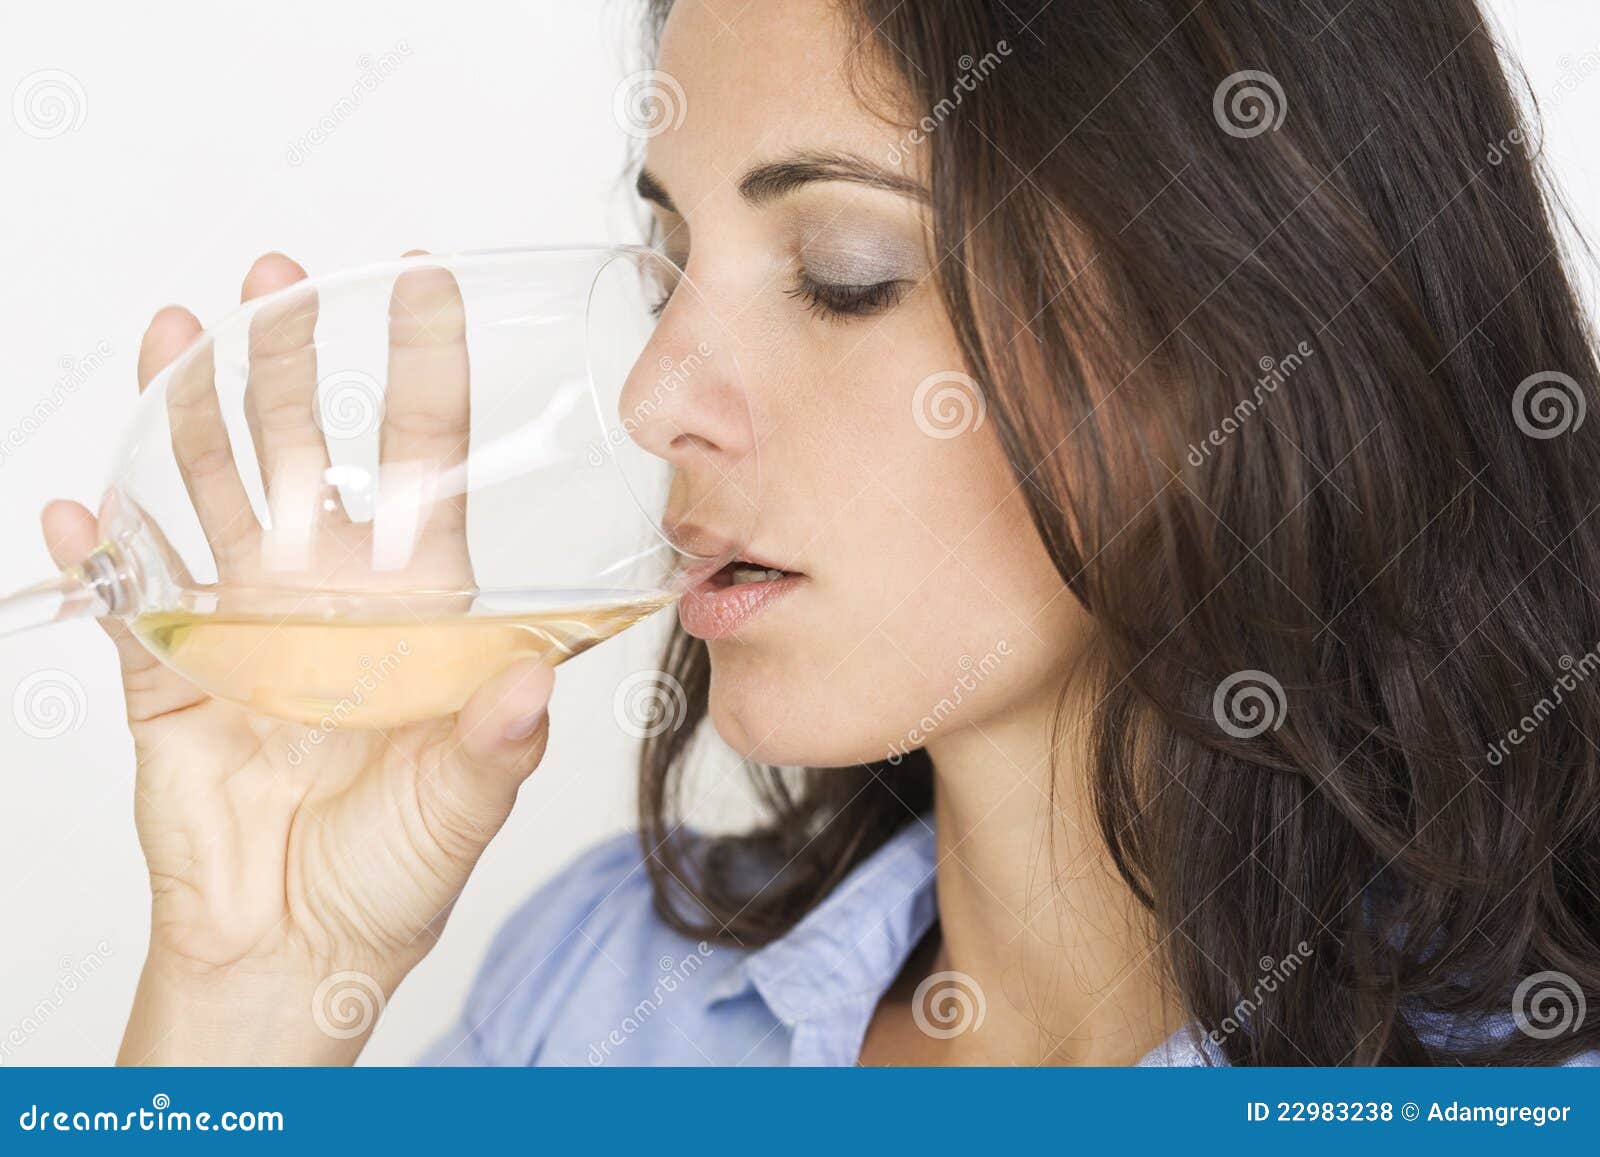 Woman Drinking A Glass Of White Wine Royalty Free Stock Photos Image